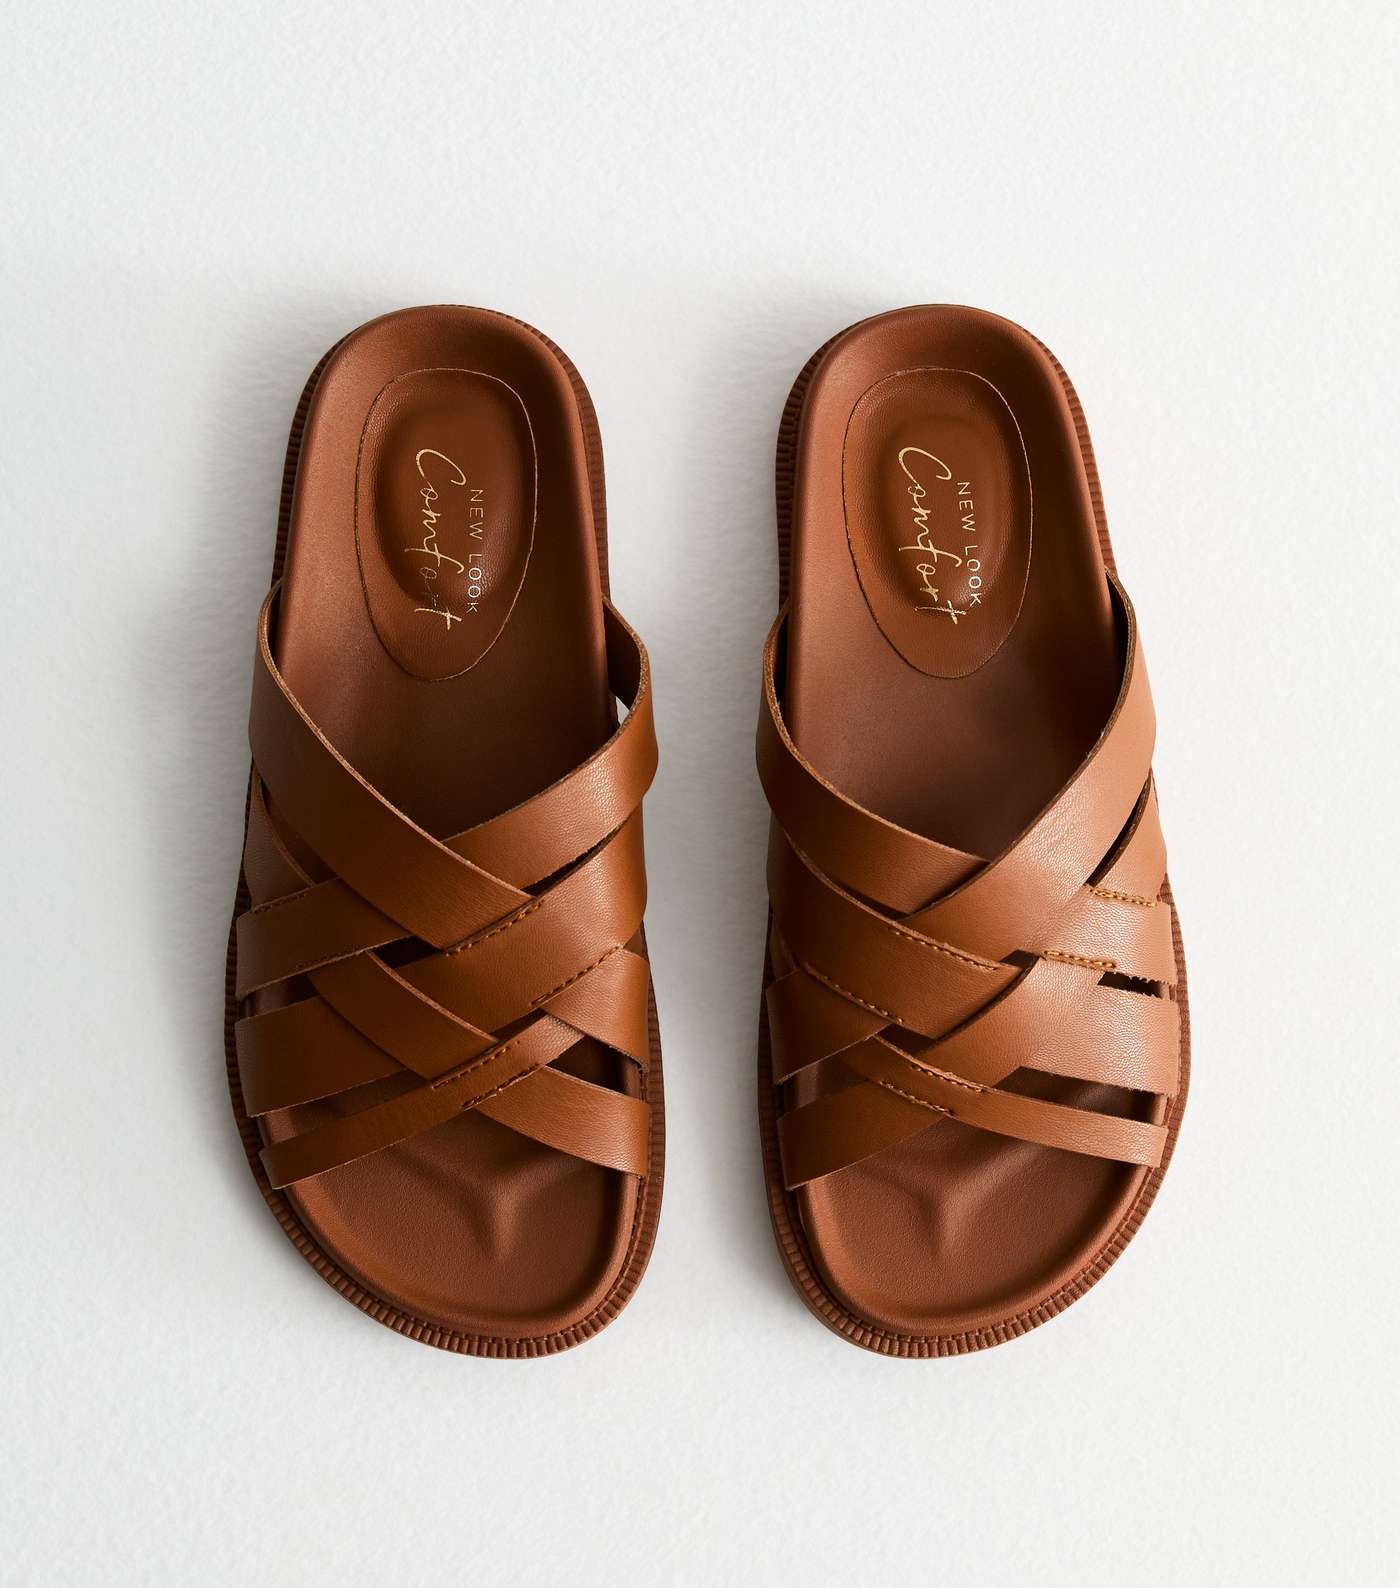 Tan Leather-Look Cross Strap Chunky Sandals